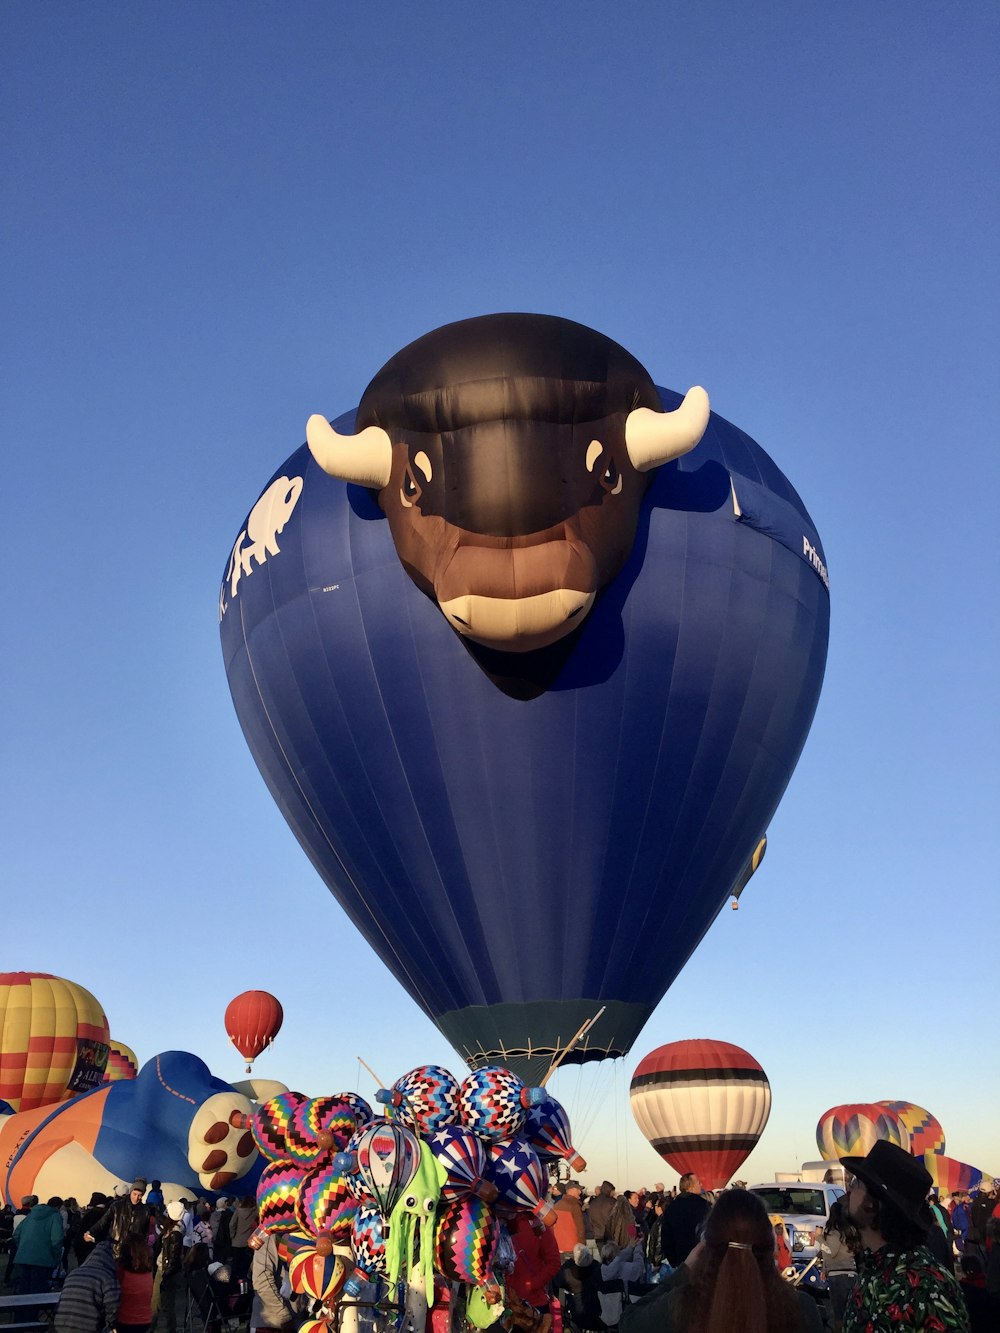 people watching multicolored hot air balloons during daytime